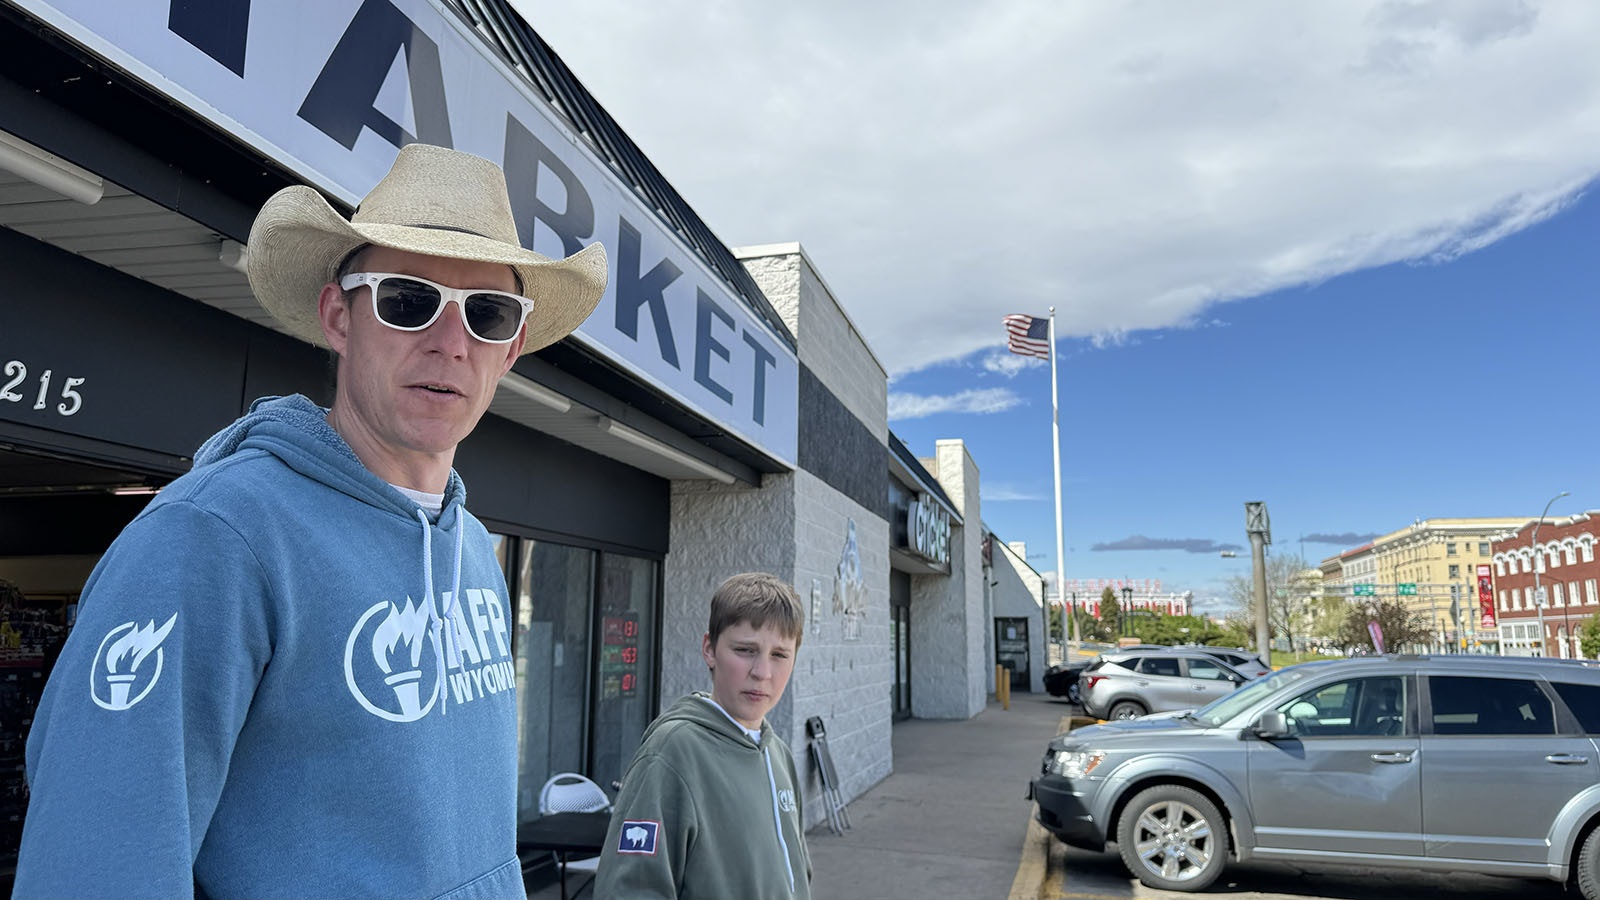 Tyler Lindholm, director of the Wyoming chapter of Americans for Prosperity, a conservative activist group, working to fight the Biden administration’s economic policies, at Hi Market in Cheyenne on Saturday.